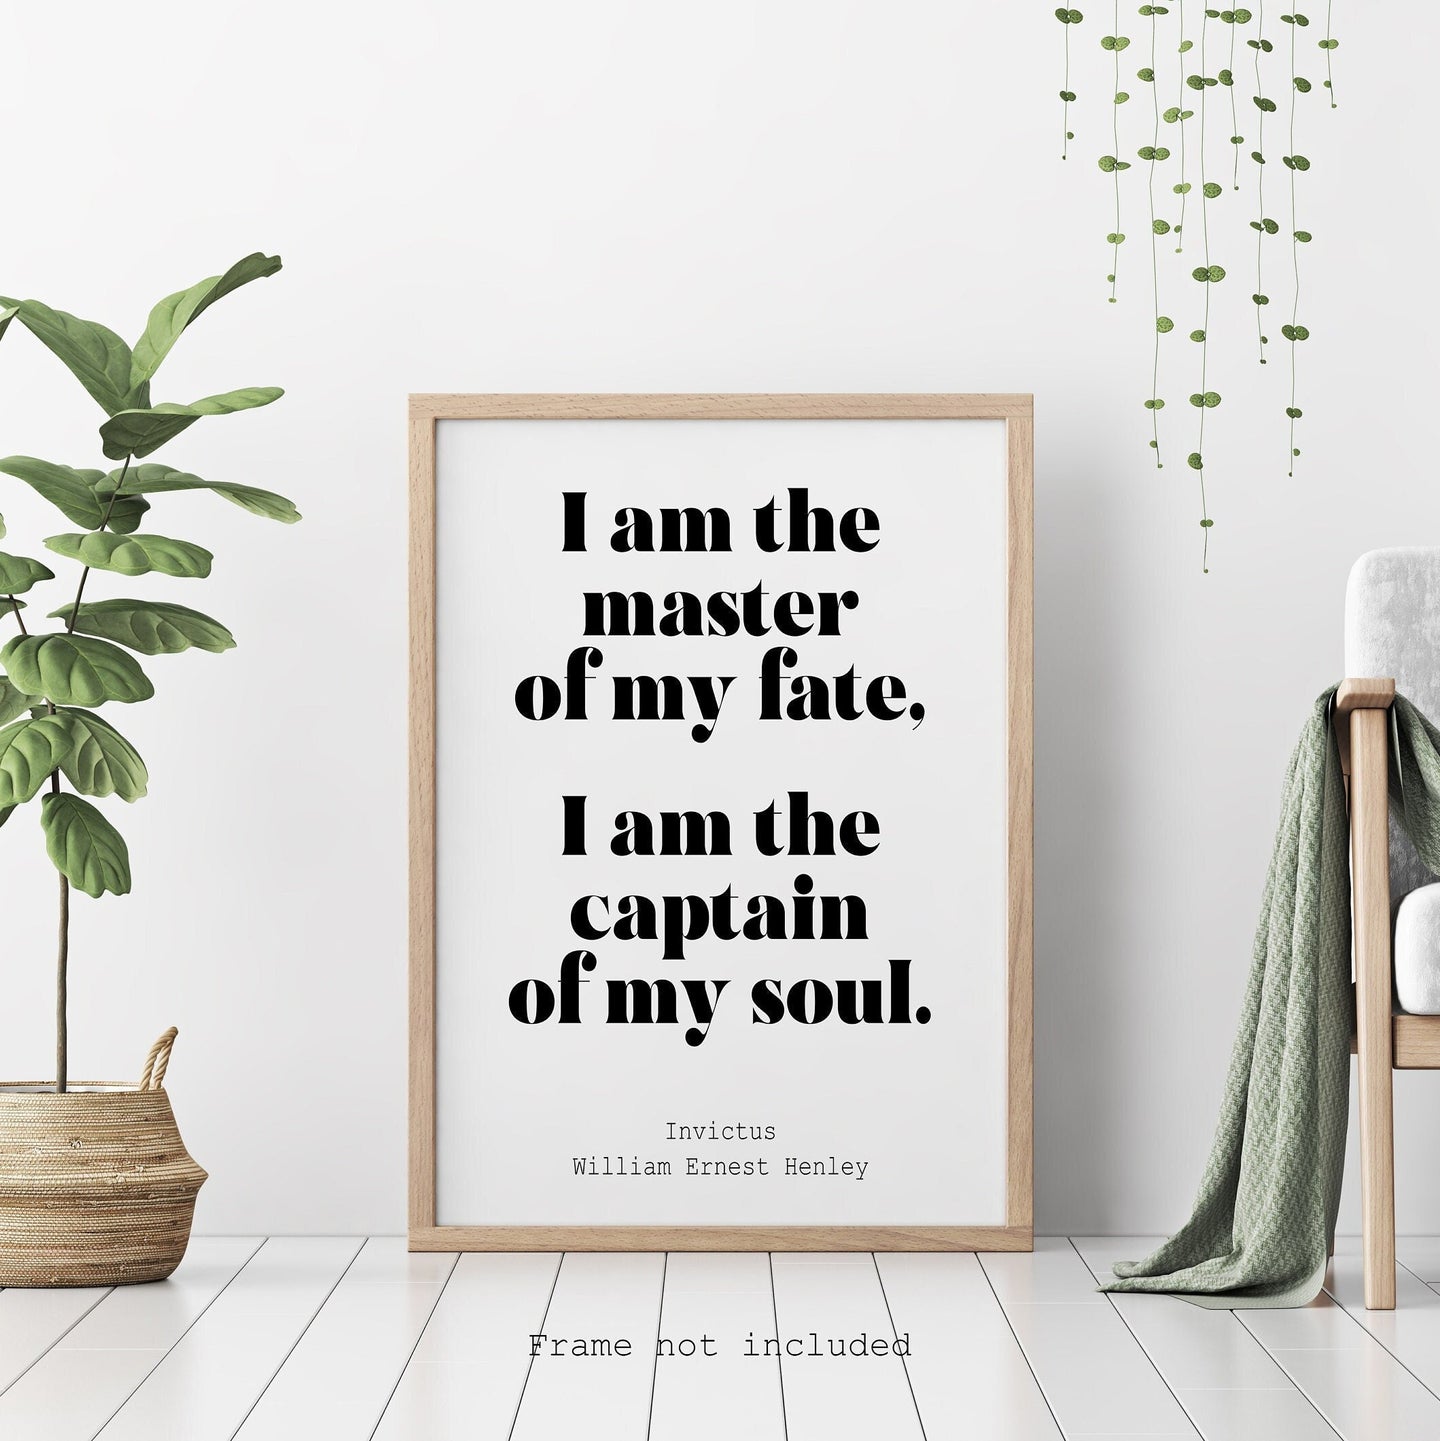 Invictus poem William Ernest Henley I am the master of my fate... captain of my soul - Unframed print